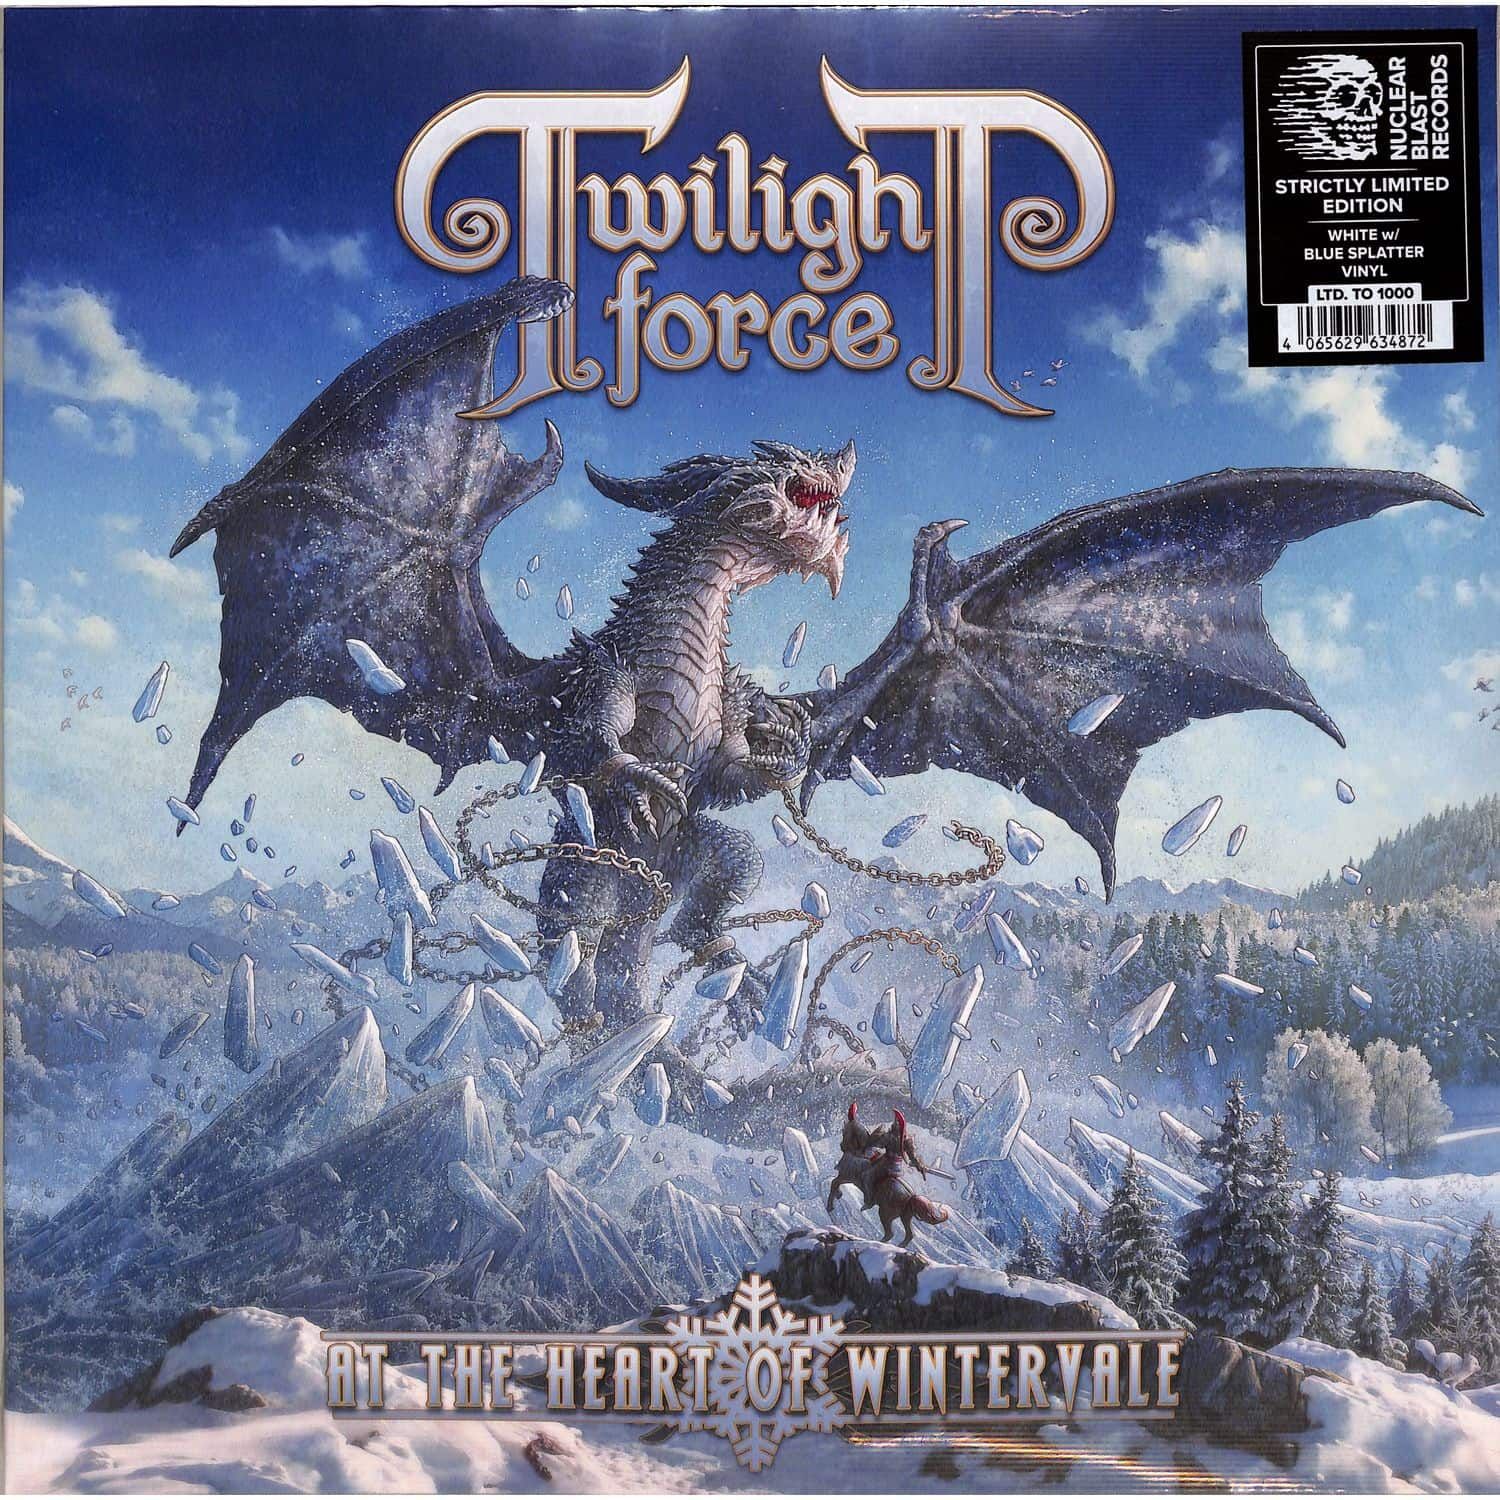 4065629634872, Виниловая пластинка Twilight Force, At The Heart Of Wintervale (coloured) виниловые пластинки nuclear blast helloween straight out of hell 2lp